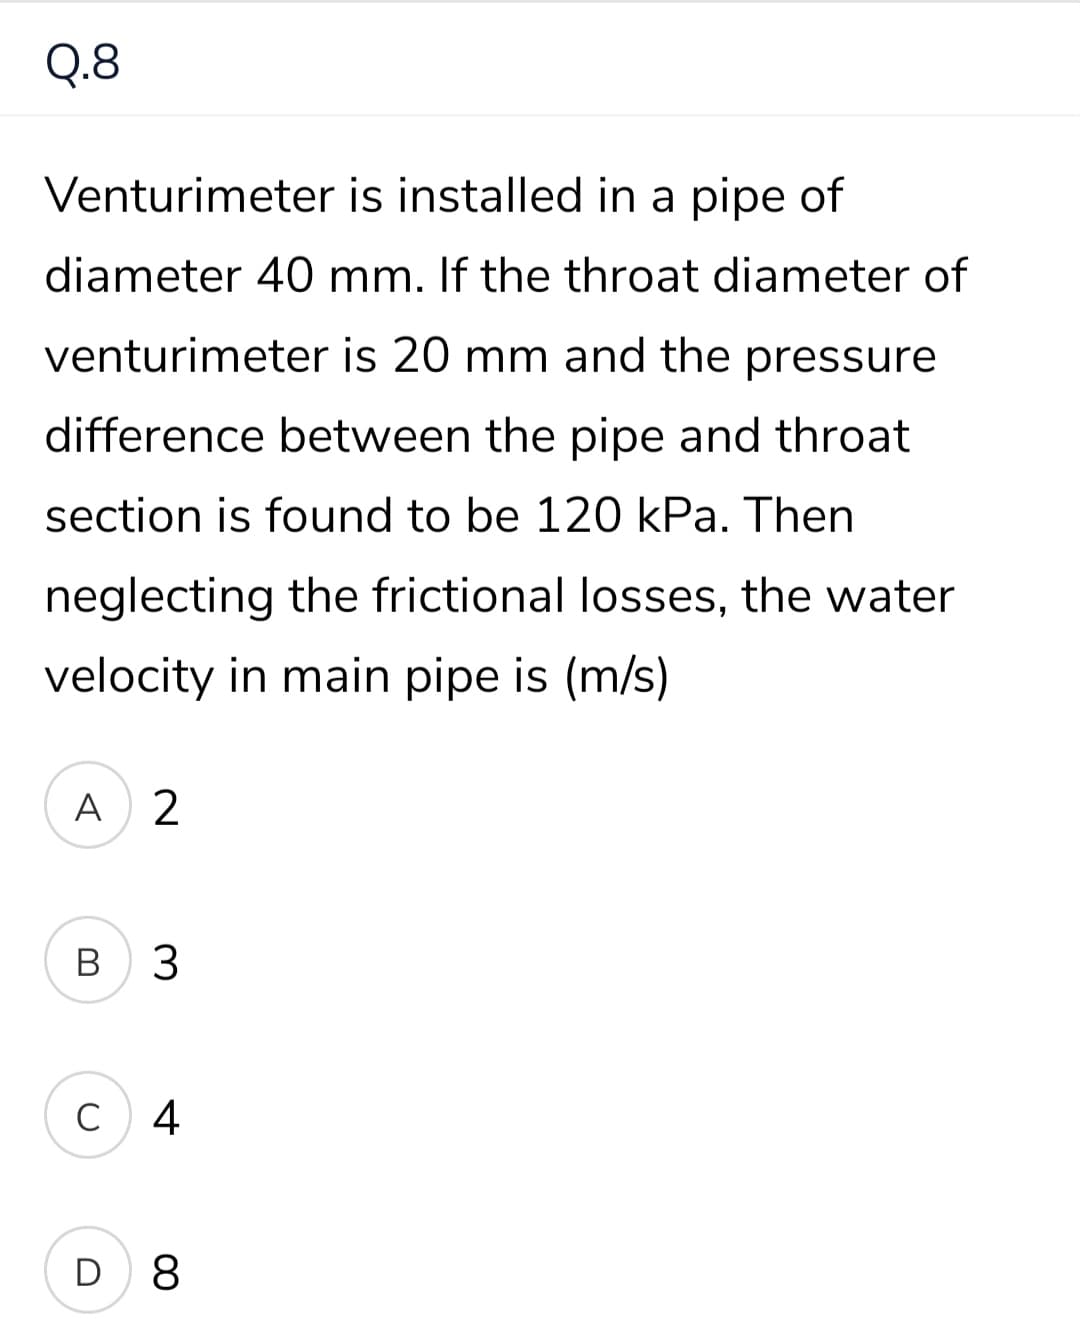 Q.8
Venturimeter is installed in a pipe of
diameter 40 mm. If the throat diameter of
venturimeter is 20 mm and the pressure
difference between the pipe and throat
section is found to be 120 kPa. Then
neglecting the frictional losses, the water
velocity in main pipe is (m/s)
A
В
3
C
4
D 8
